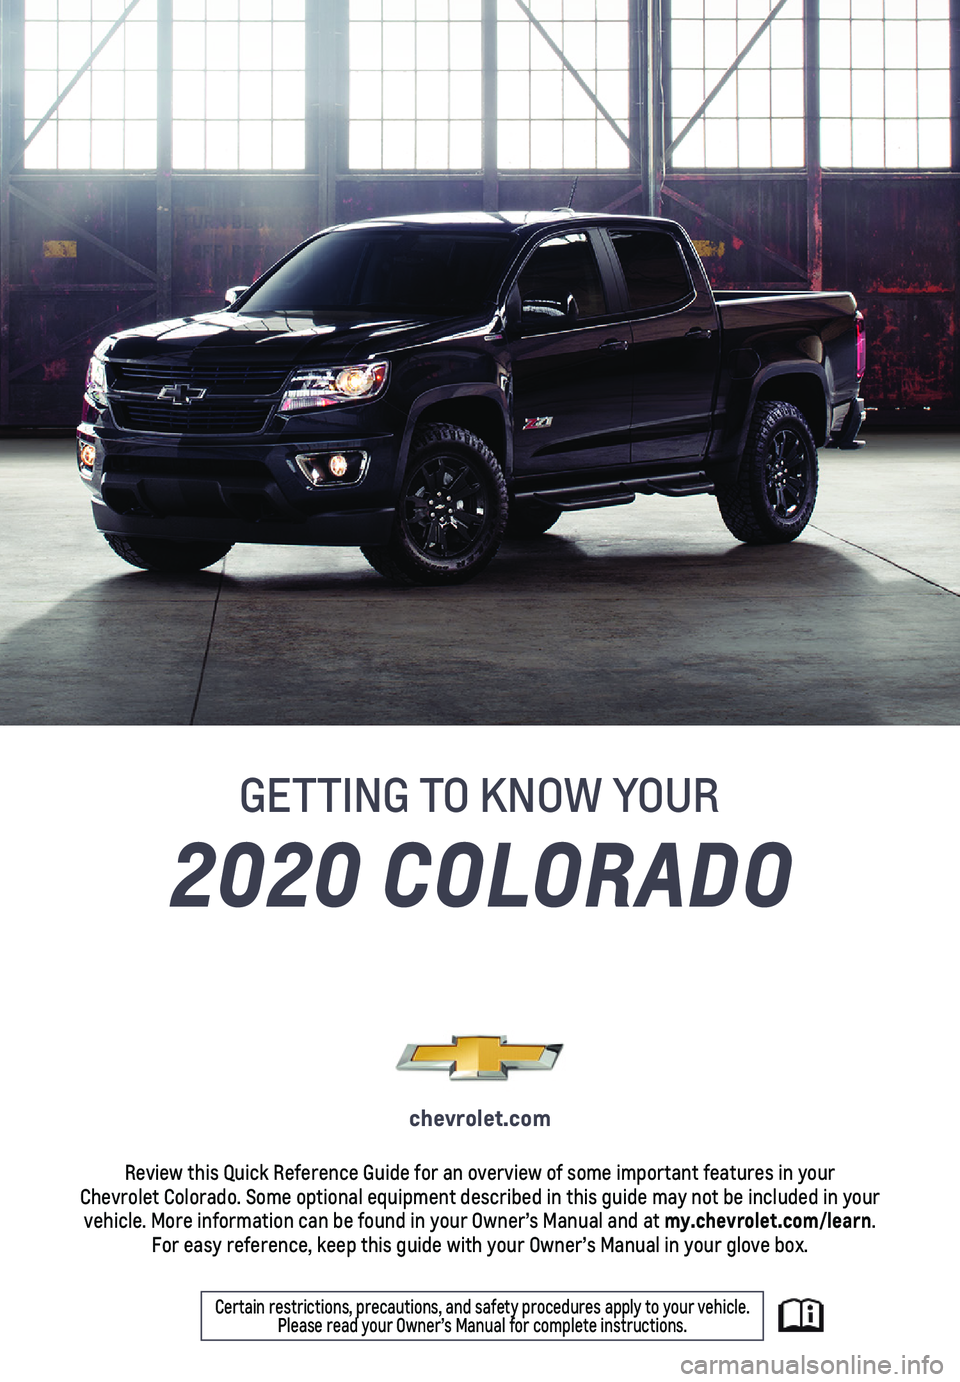 CHEVROLET COLORADO 2020  Get To Know Guide 1
2020 COLORADO
GETTING TO KNOW YOUR
chevrolet.com
Review this Quick Reference Guide for an overview of some important feat\
ures in your  Chevrolet Colorado. Some optional equipment described in this